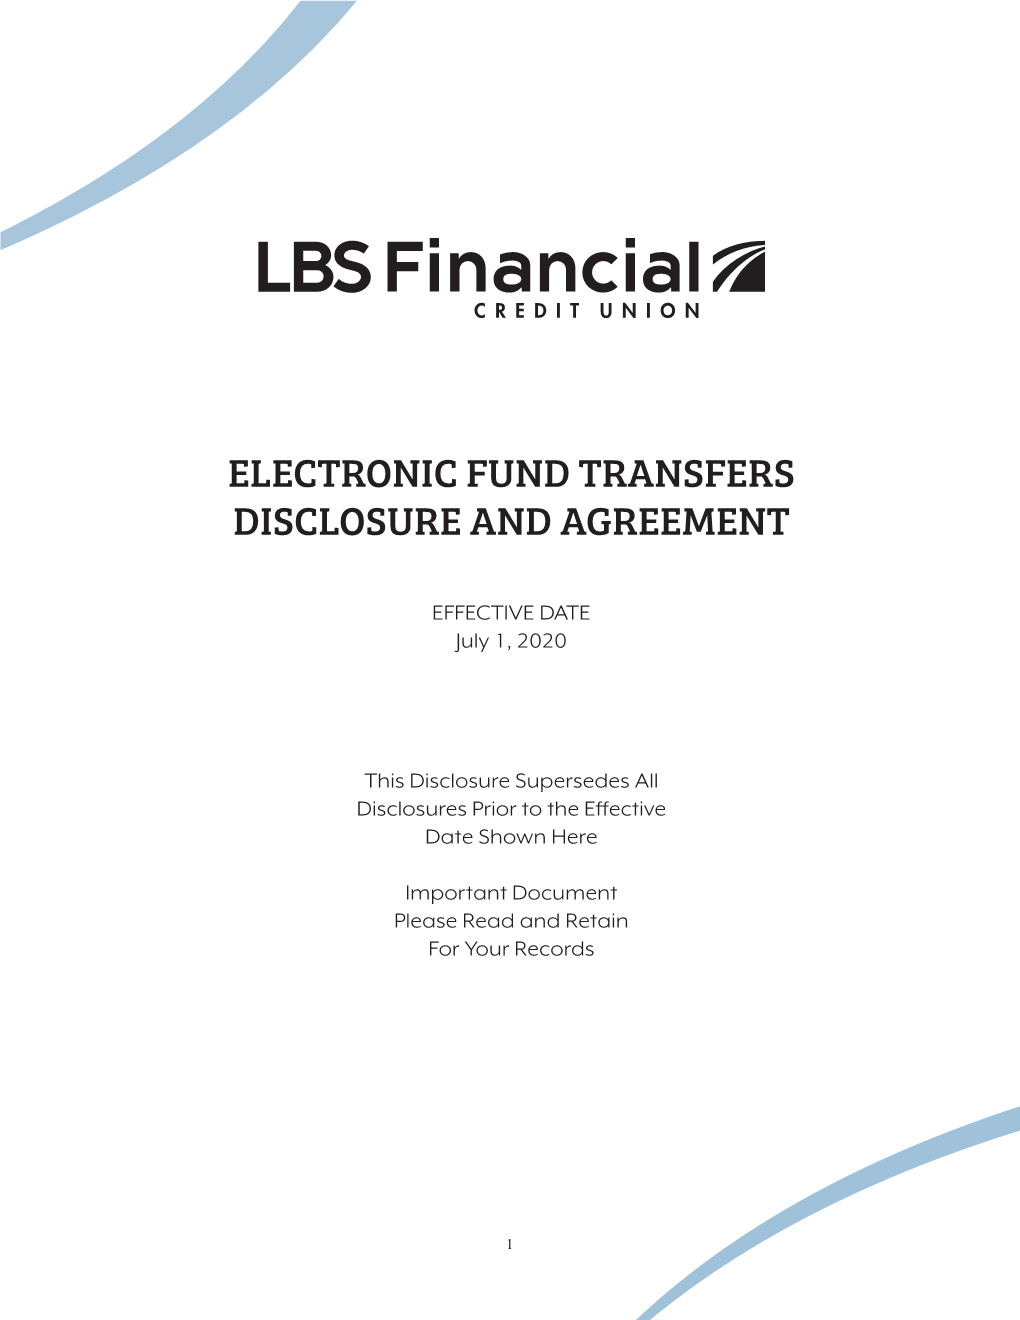 Electronic Fund Transfers Disclosure and Agreement